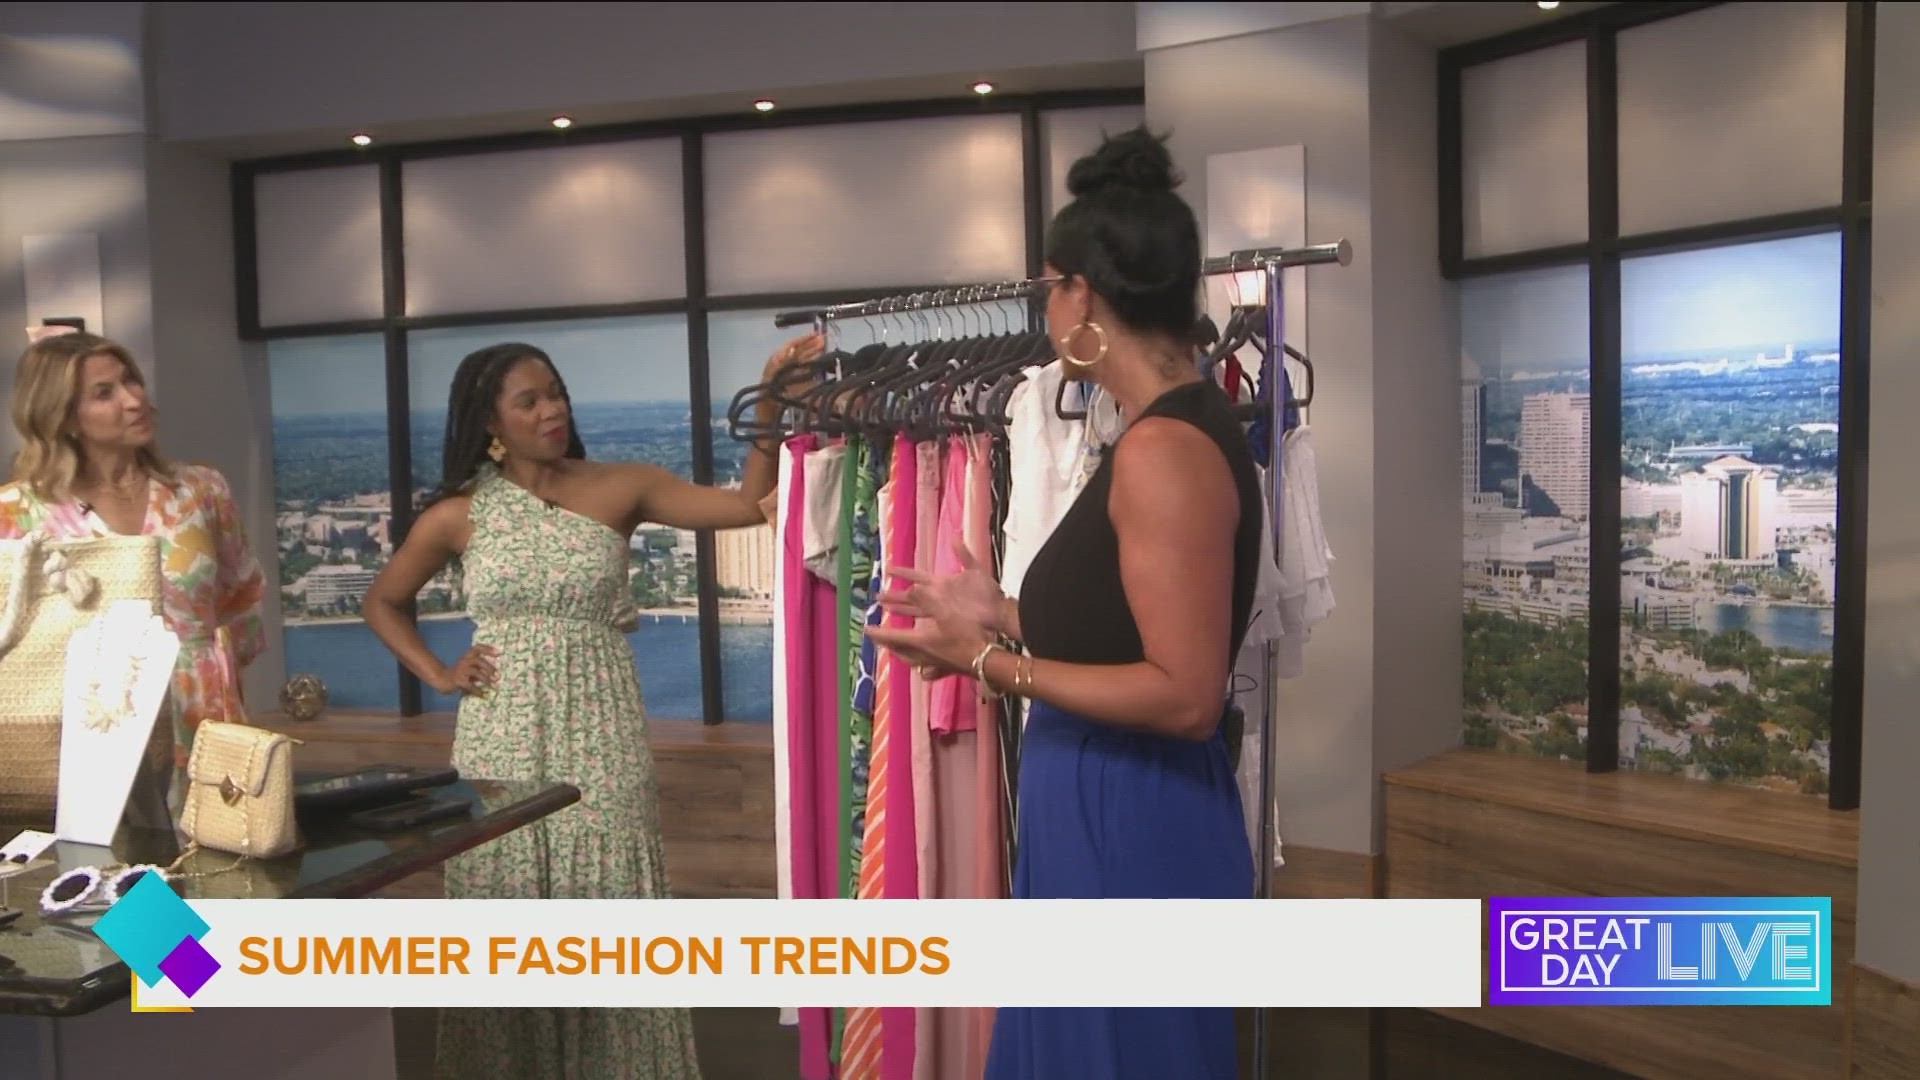 Danielle Evans with Don Me Now joined GDL to tell us why wide-legged pants should be your summer fashion staple.